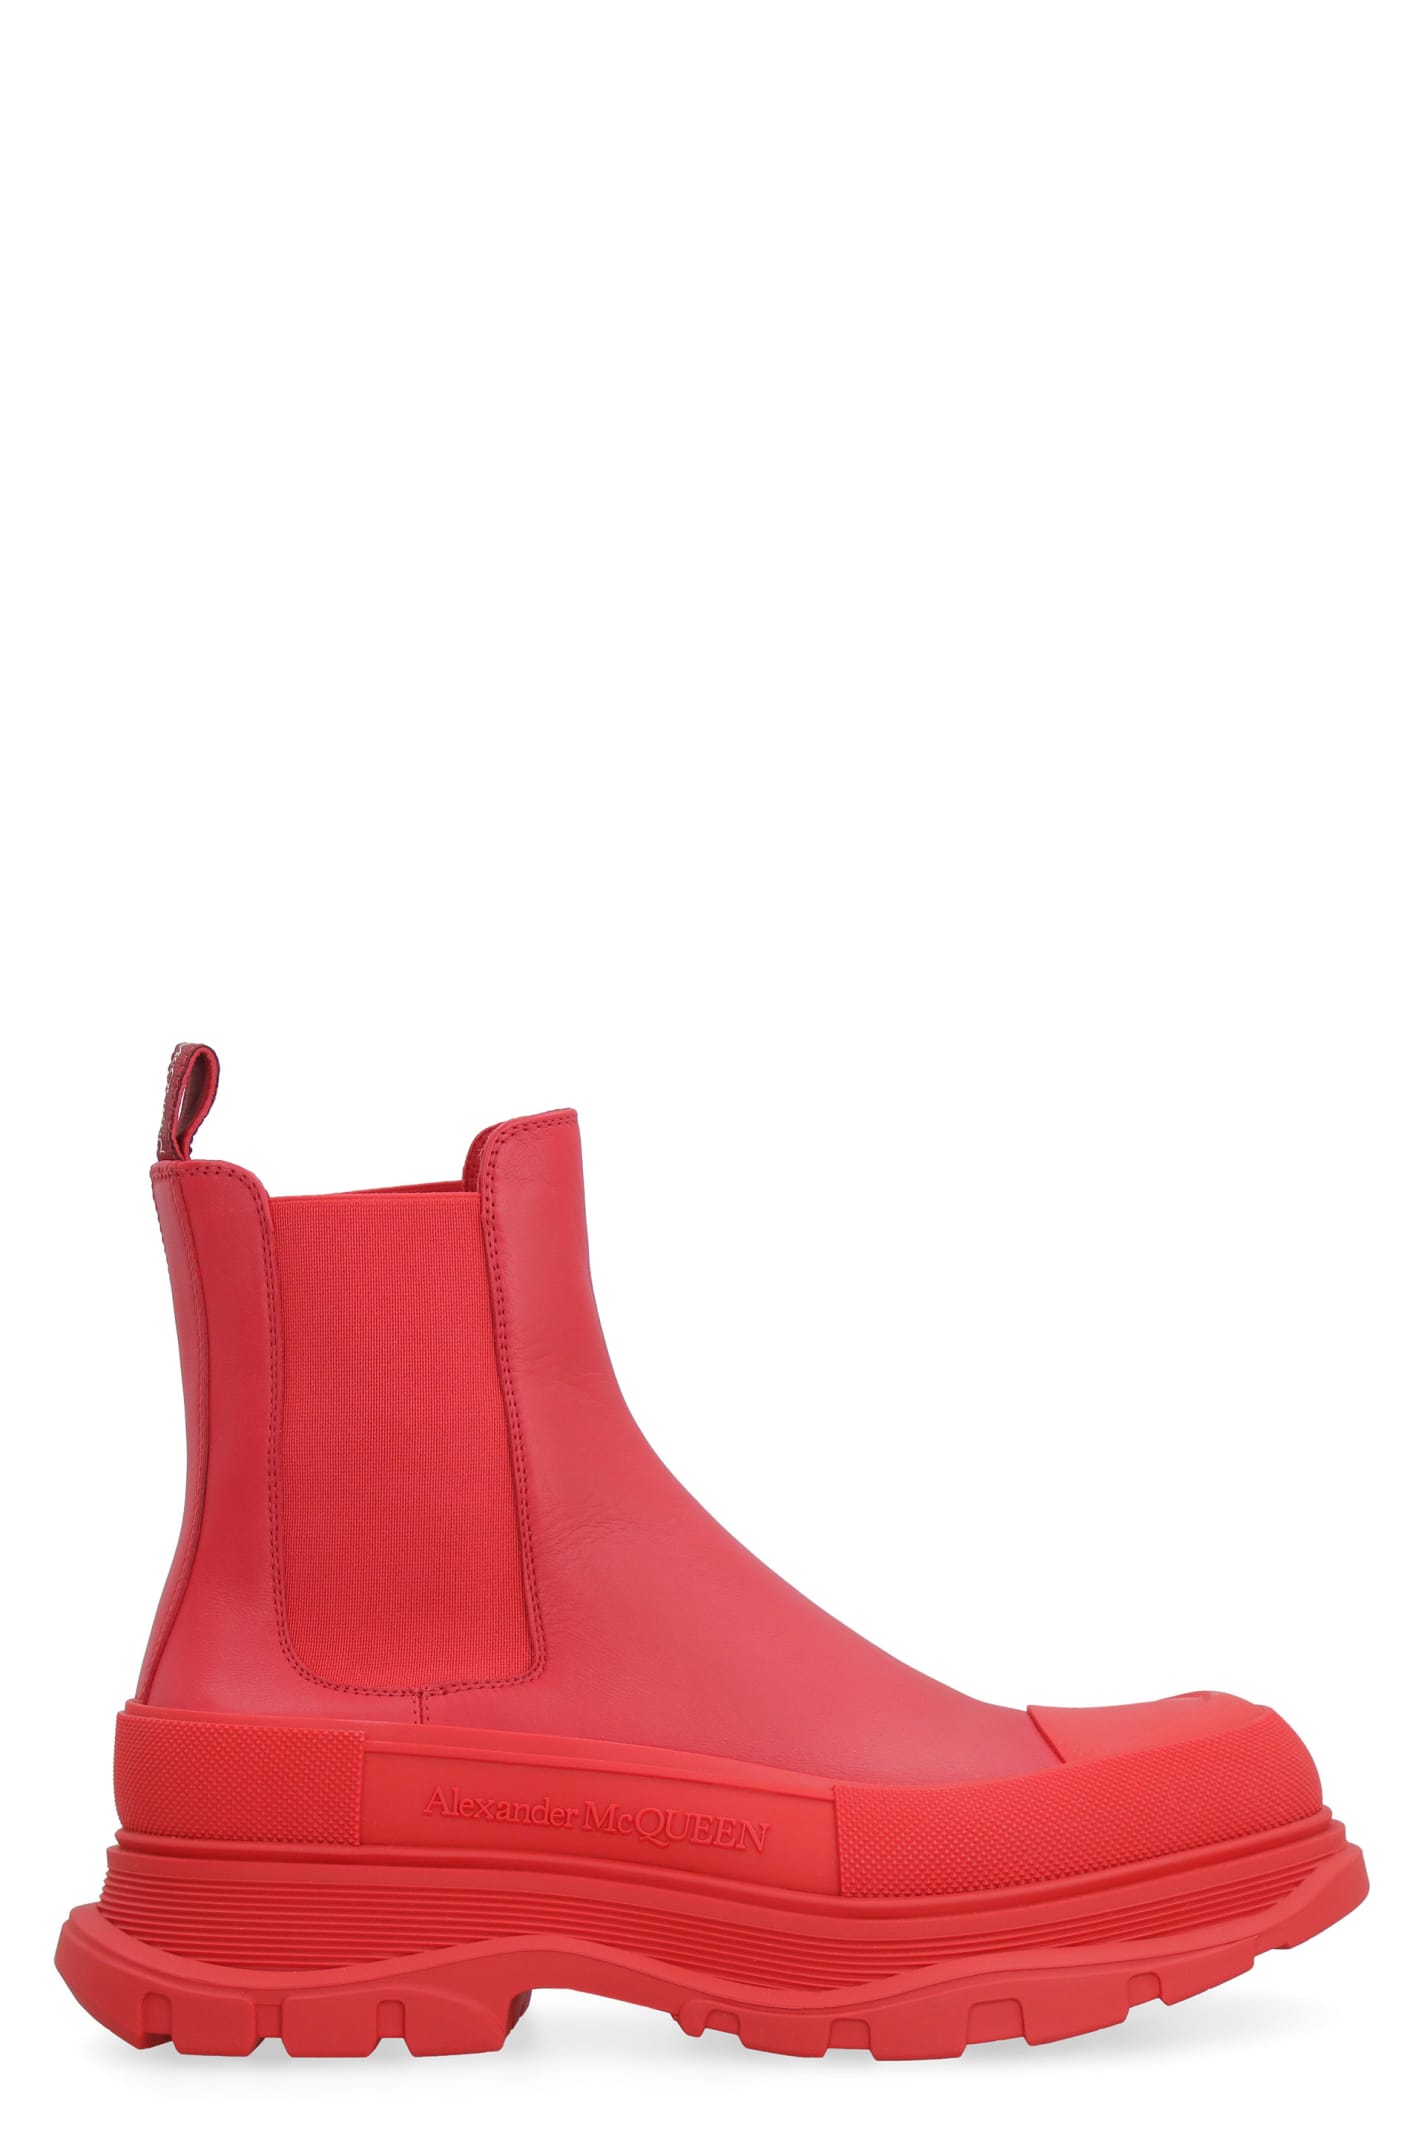 Alexander McQueen Tread Slick Leather Ankle Boots